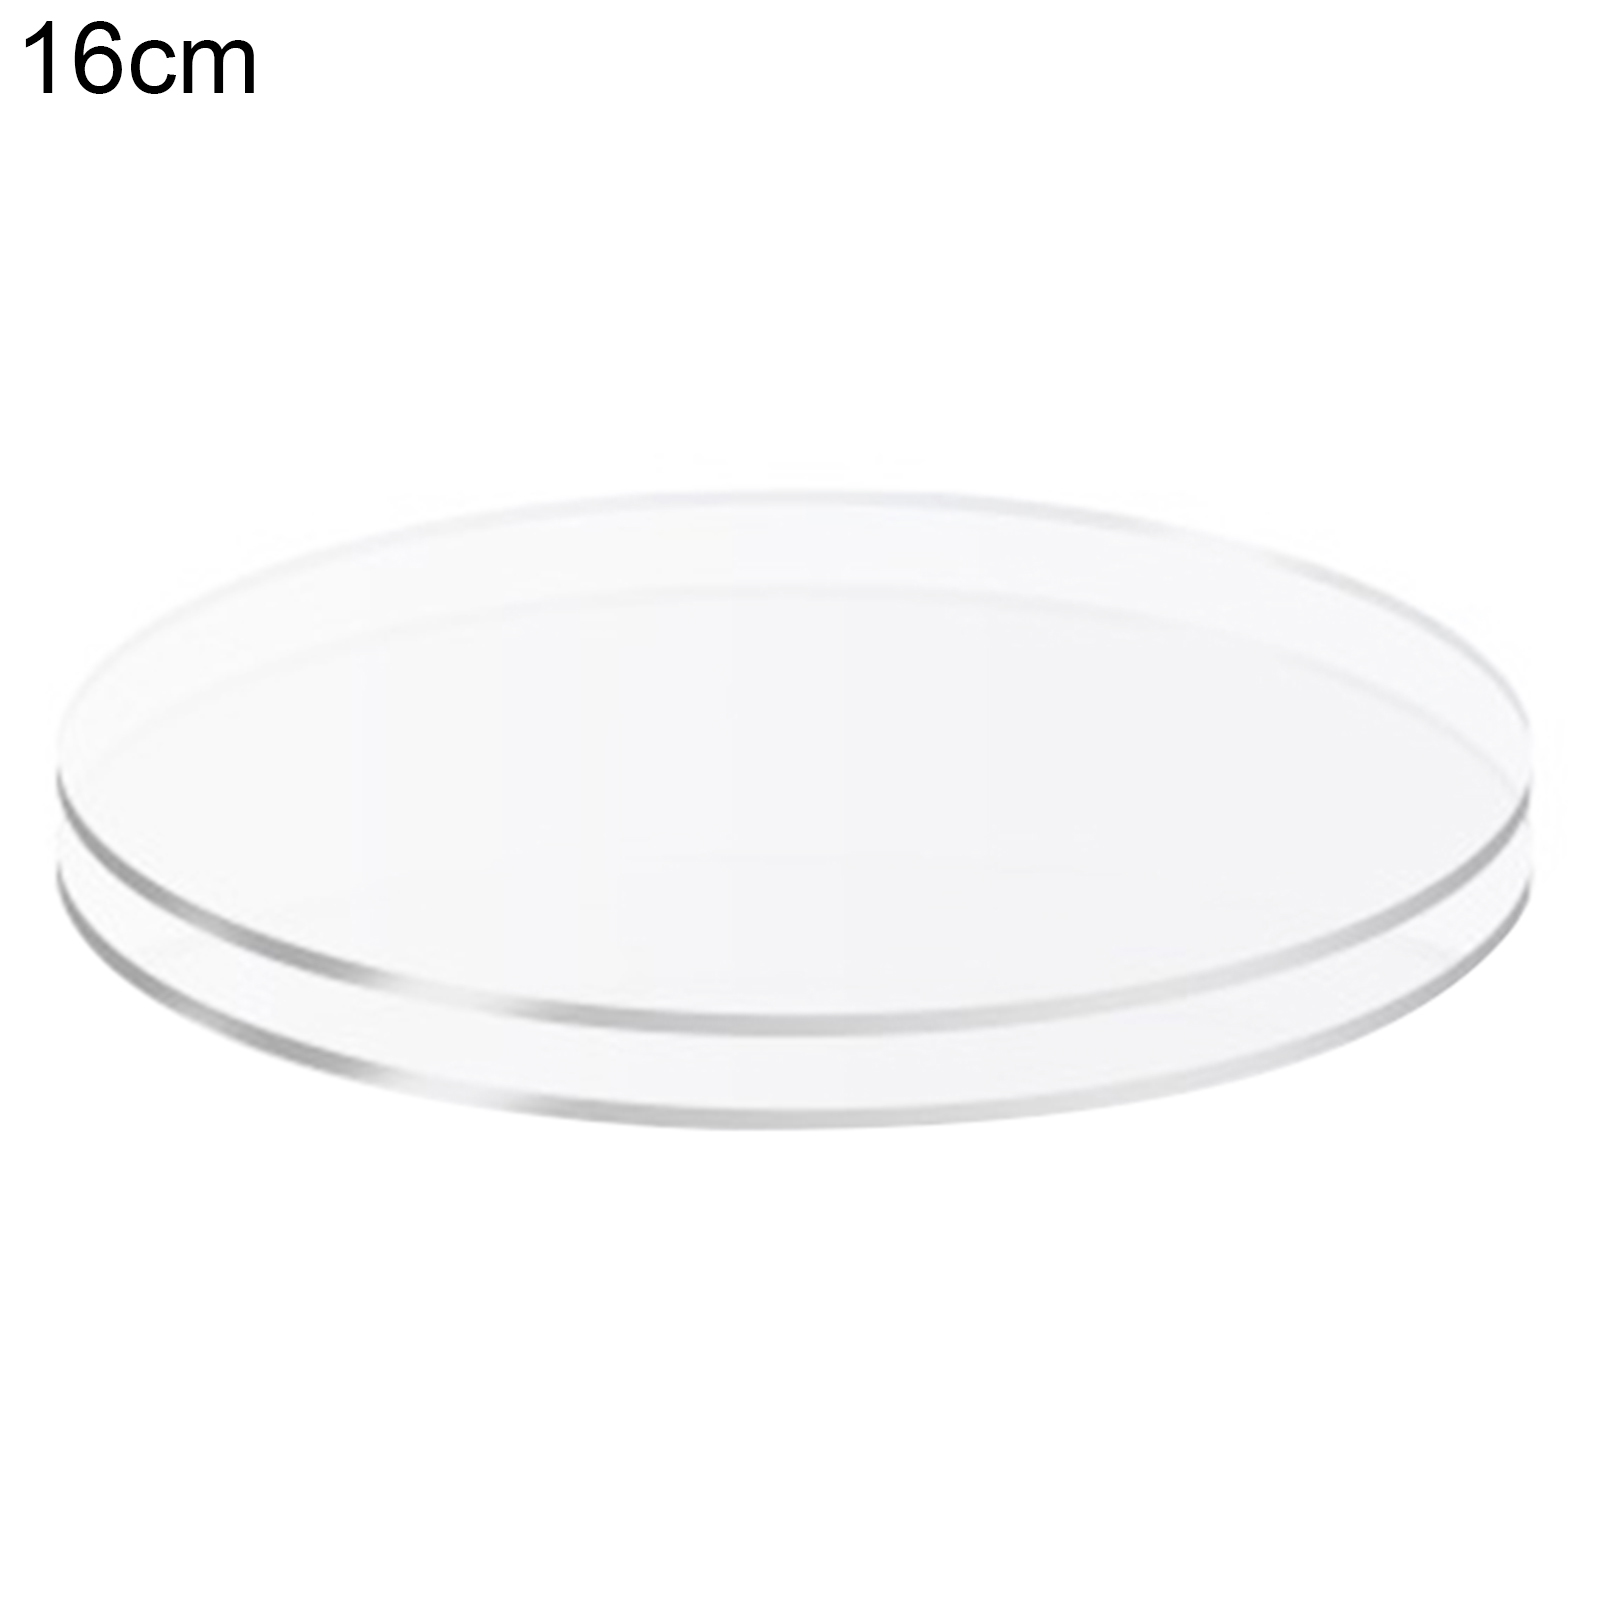 2Pcs Cake Plates Non-Sticky Reused Acrylic Buttercream Cake Discs for Cakes  Serving Clear Acrylic 